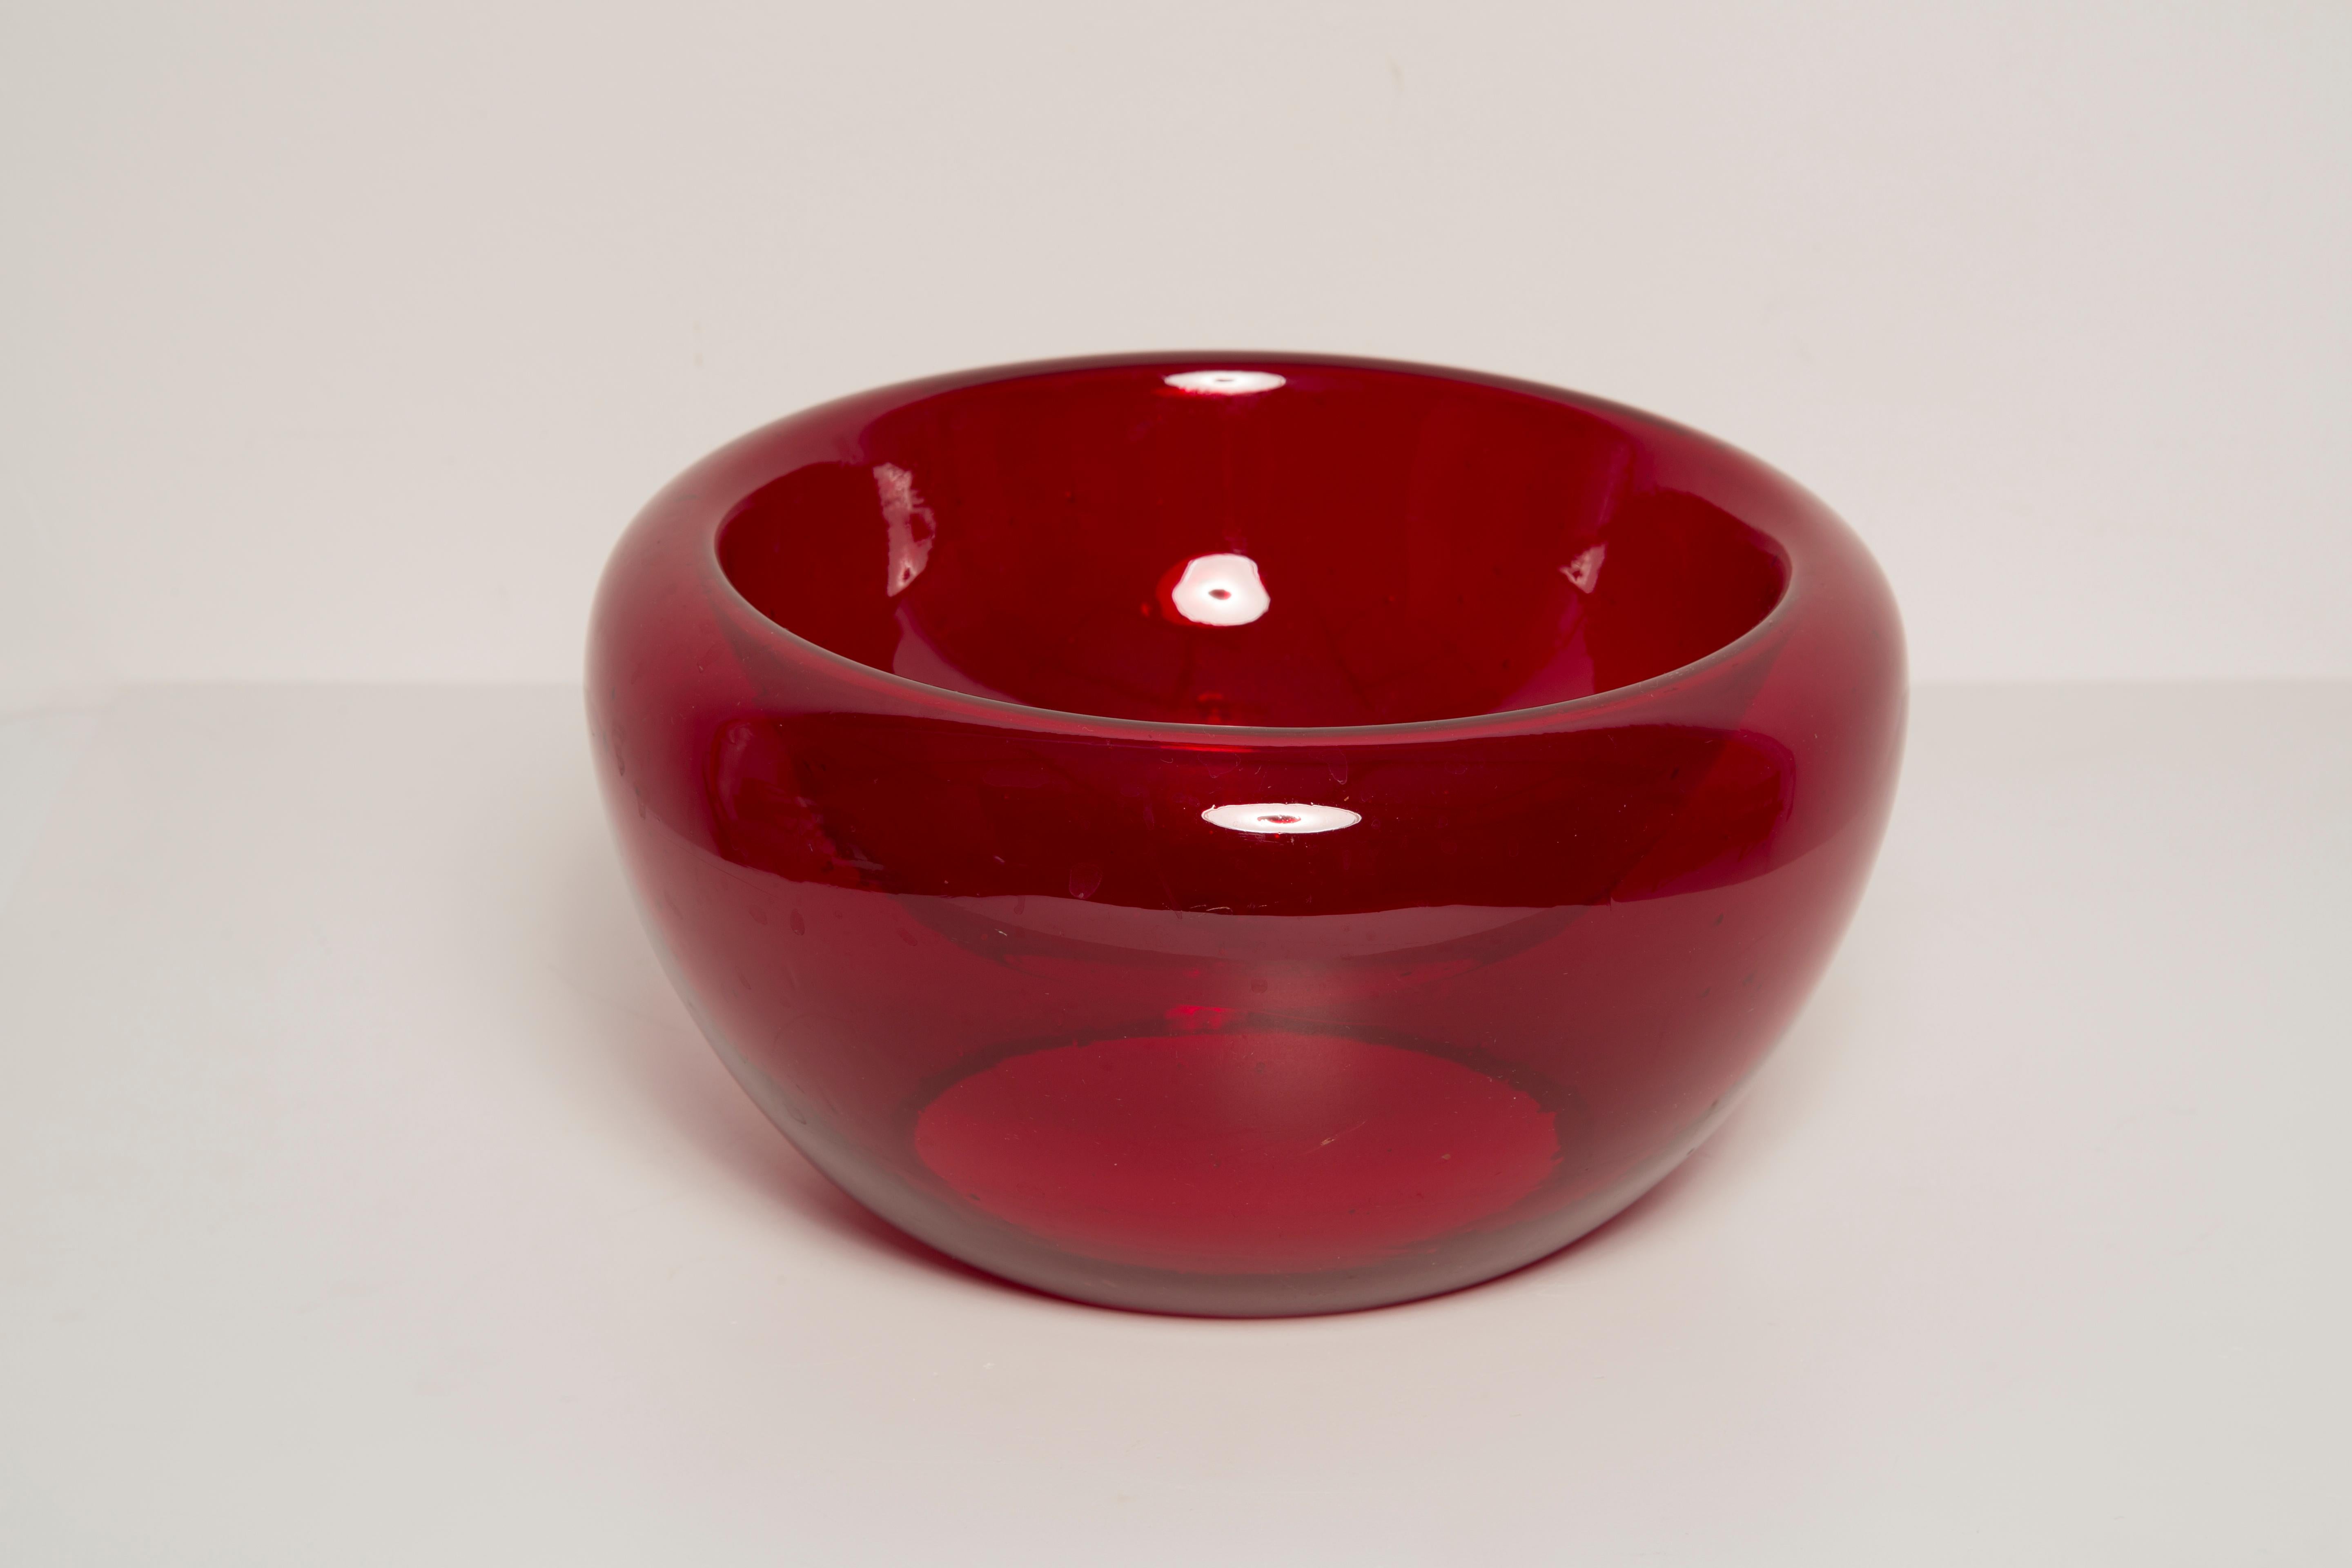 Beautiful decorative red glass plate/bowl from Italy. Plate is in very good vintage condition, no damage or cracks. Original glass. Unique piece for every table and interior! Only one piece available.